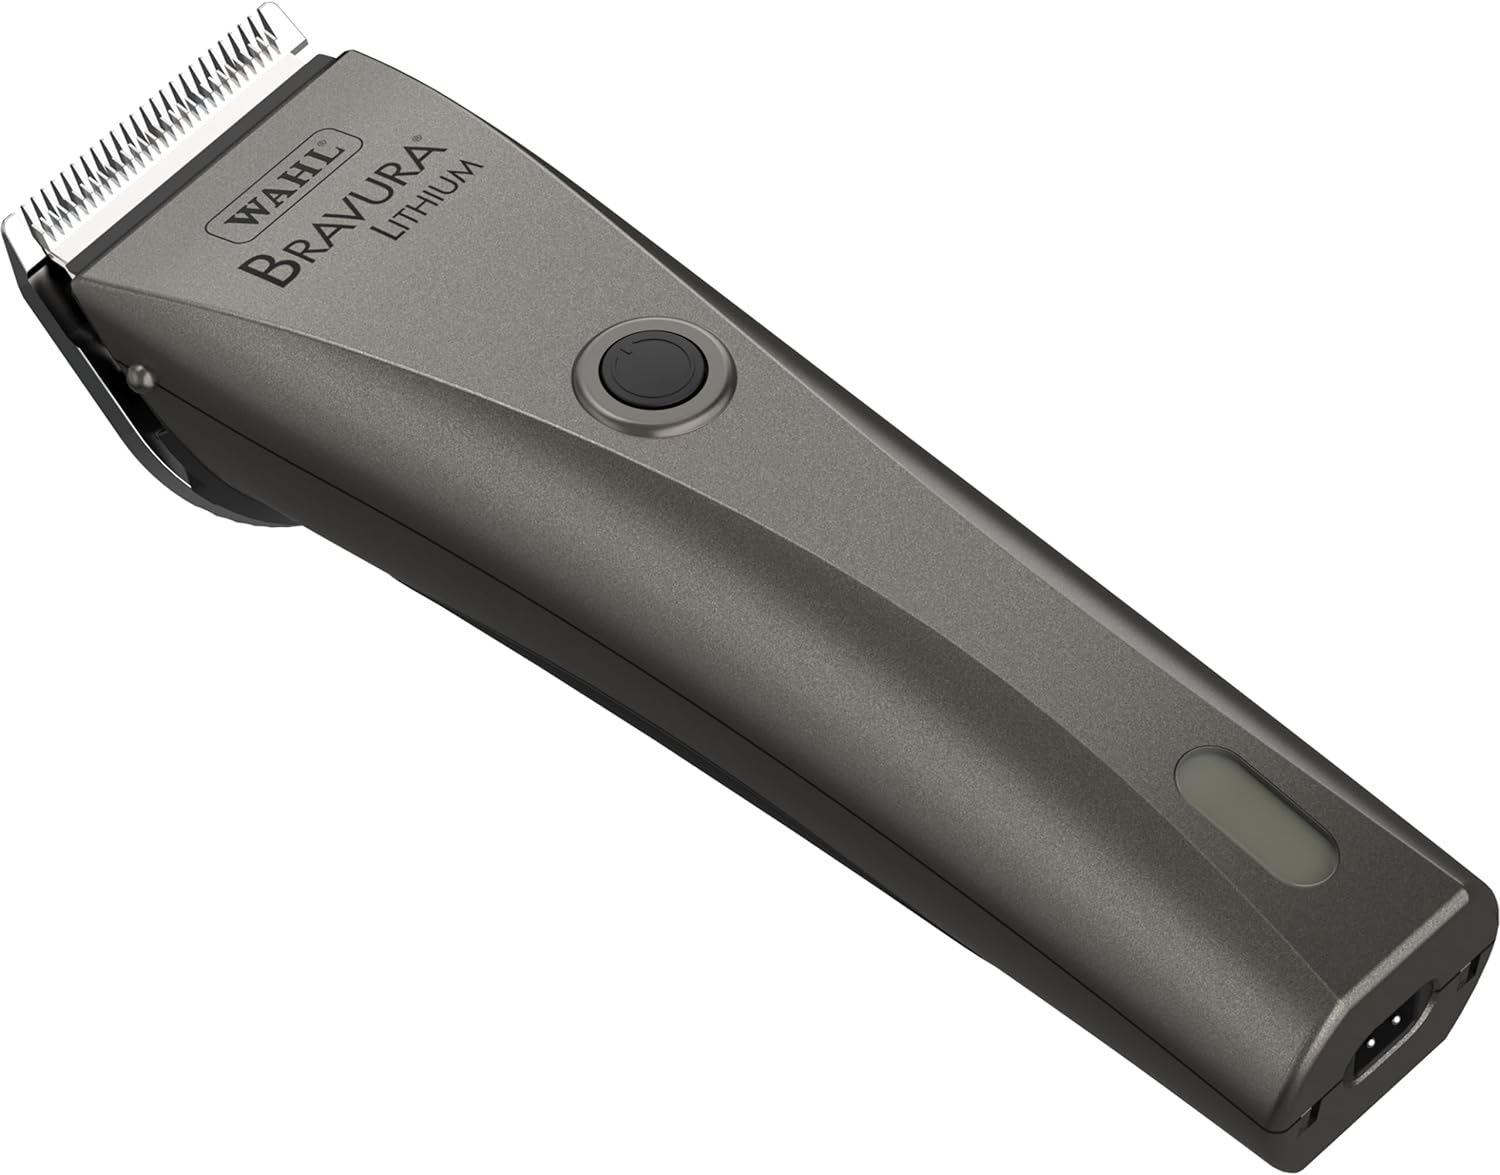 WAHL Professional Bravura Lithium 5-in-1 Clipper Kit